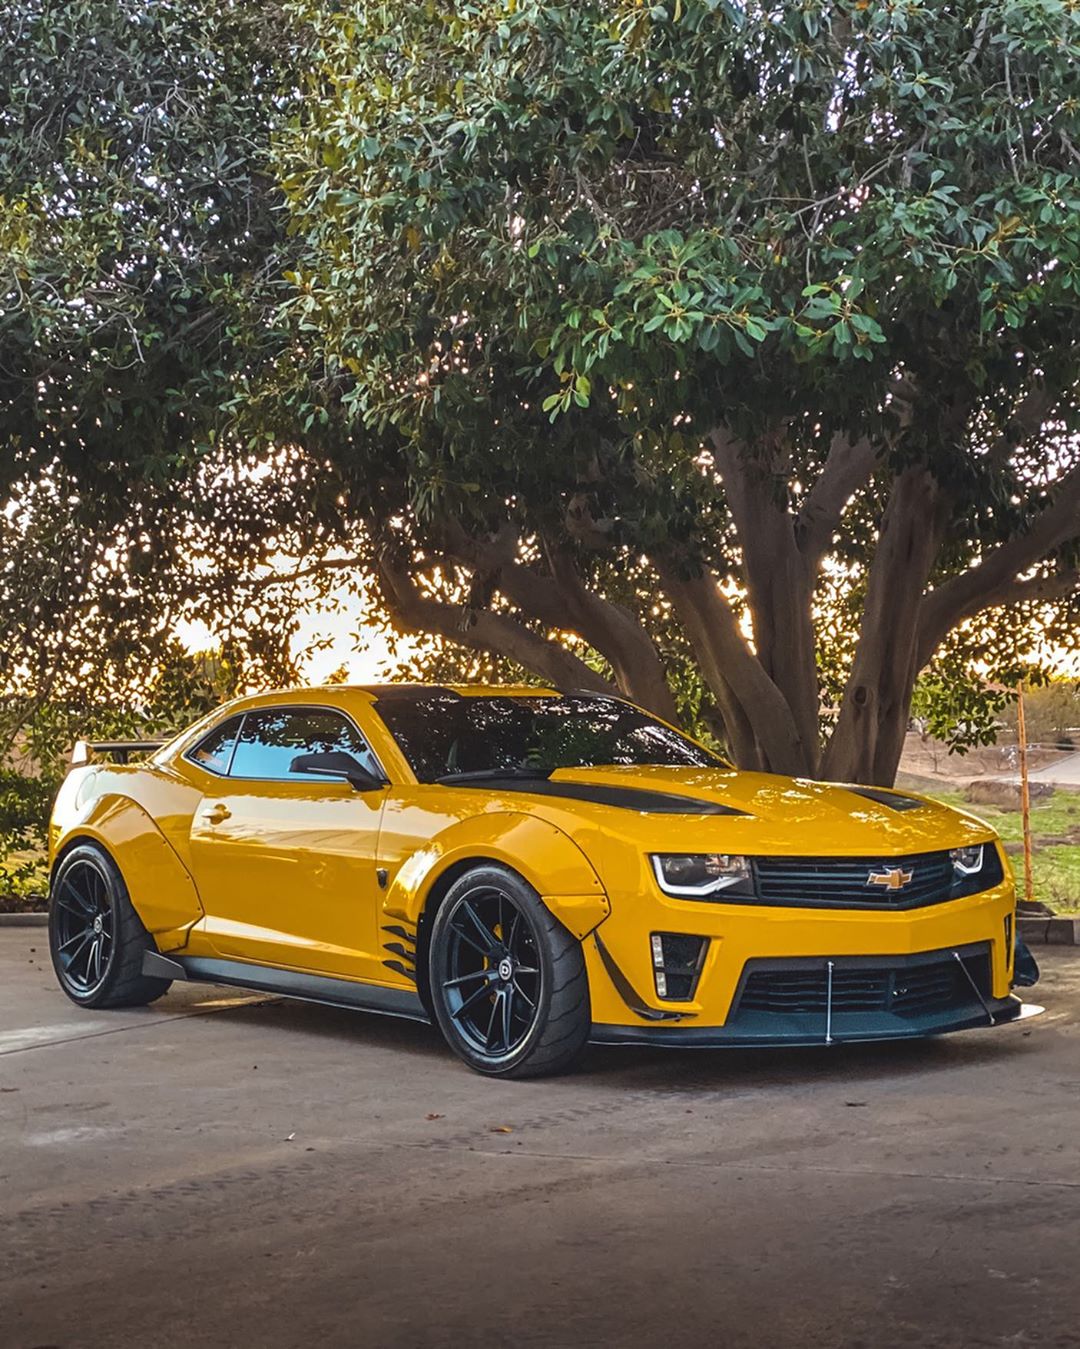 Bumblebee Gets New Body Kit For Transformers Megan Fox Is 52 Off